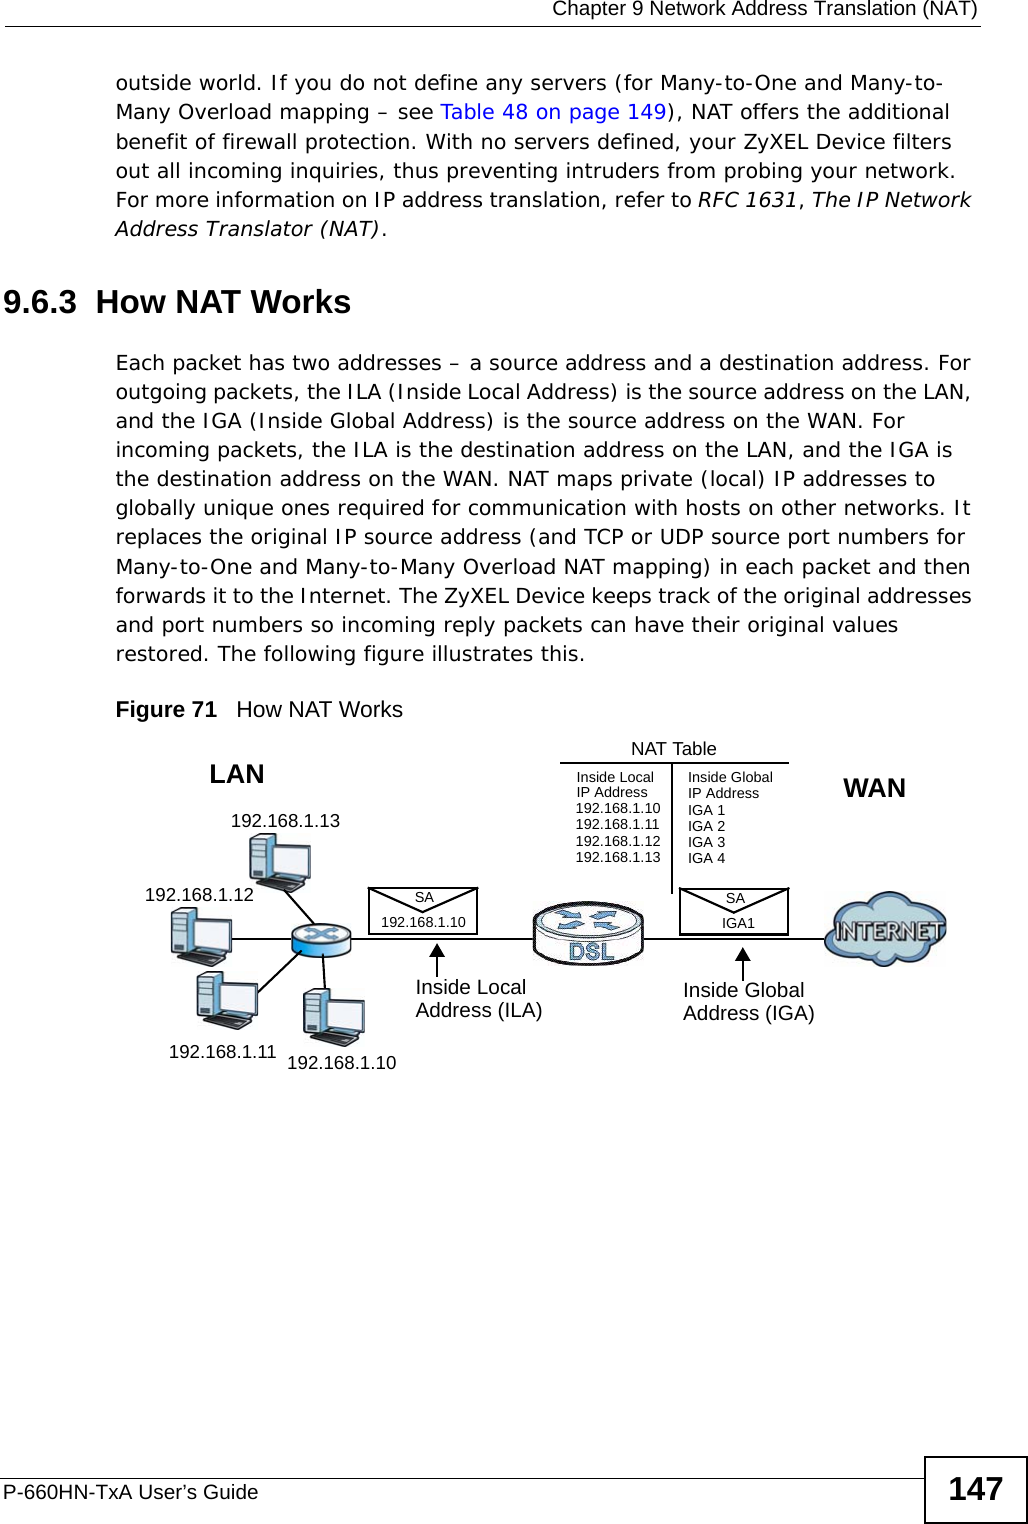  Chapter 9 Network Address Translation (NAT)P-660HN-TxA User’s Guide 147outside world. If you do not define any servers (for Many-to-One and Many-to-Many Overload mapping – see Table 48 on page 149), NAT offers the additional benefit of firewall protection. With no servers defined, your ZyXEL Device filters out all incoming inquiries, thus preventing intruders from probing your network. For more information on IP address translation, refer to RFC 1631, The IP Network Address Translator (NAT).9.6.3  How NAT WorksEach packet has two addresses – a source address and a destination address. For outgoing packets, the ILA (Inside Local Address) is the source address on the LAN, and the IGA (Inside Global Address) is the source address on the WAN. For incoming packets, the ILA is the destination address on the LAN, and the IGA is the destination address on the WAN. NAT maps private (local) IP addresses to globally unique ones required for communication with hosts on other networks. It replaces the original IP source address (and TCP or UDP source port numbers for Many-to-One and Many-to-Many Overload NAT mapping) in each packet and then forwards it to the Internet. The ZyXEL Device keeps track of the original addresses and port numbers so incoming reply packets can have their original values restored. The following figure illustrates this.Figure 71   How NAT Works192.168.1.13192.168.1.10192.168.1.11192.168.1.12 SA192.168.1.10SAIGA1Inside LocalIP Address192.168.1.10192.168.1.11192.168.1.12192.168.1.13Inside Global IP AddressIGA 1IGA 2IGA 3IGA 4NAT TableWANLANInside LocalAddress (ILA) Inside GlobalAddress (IGA)